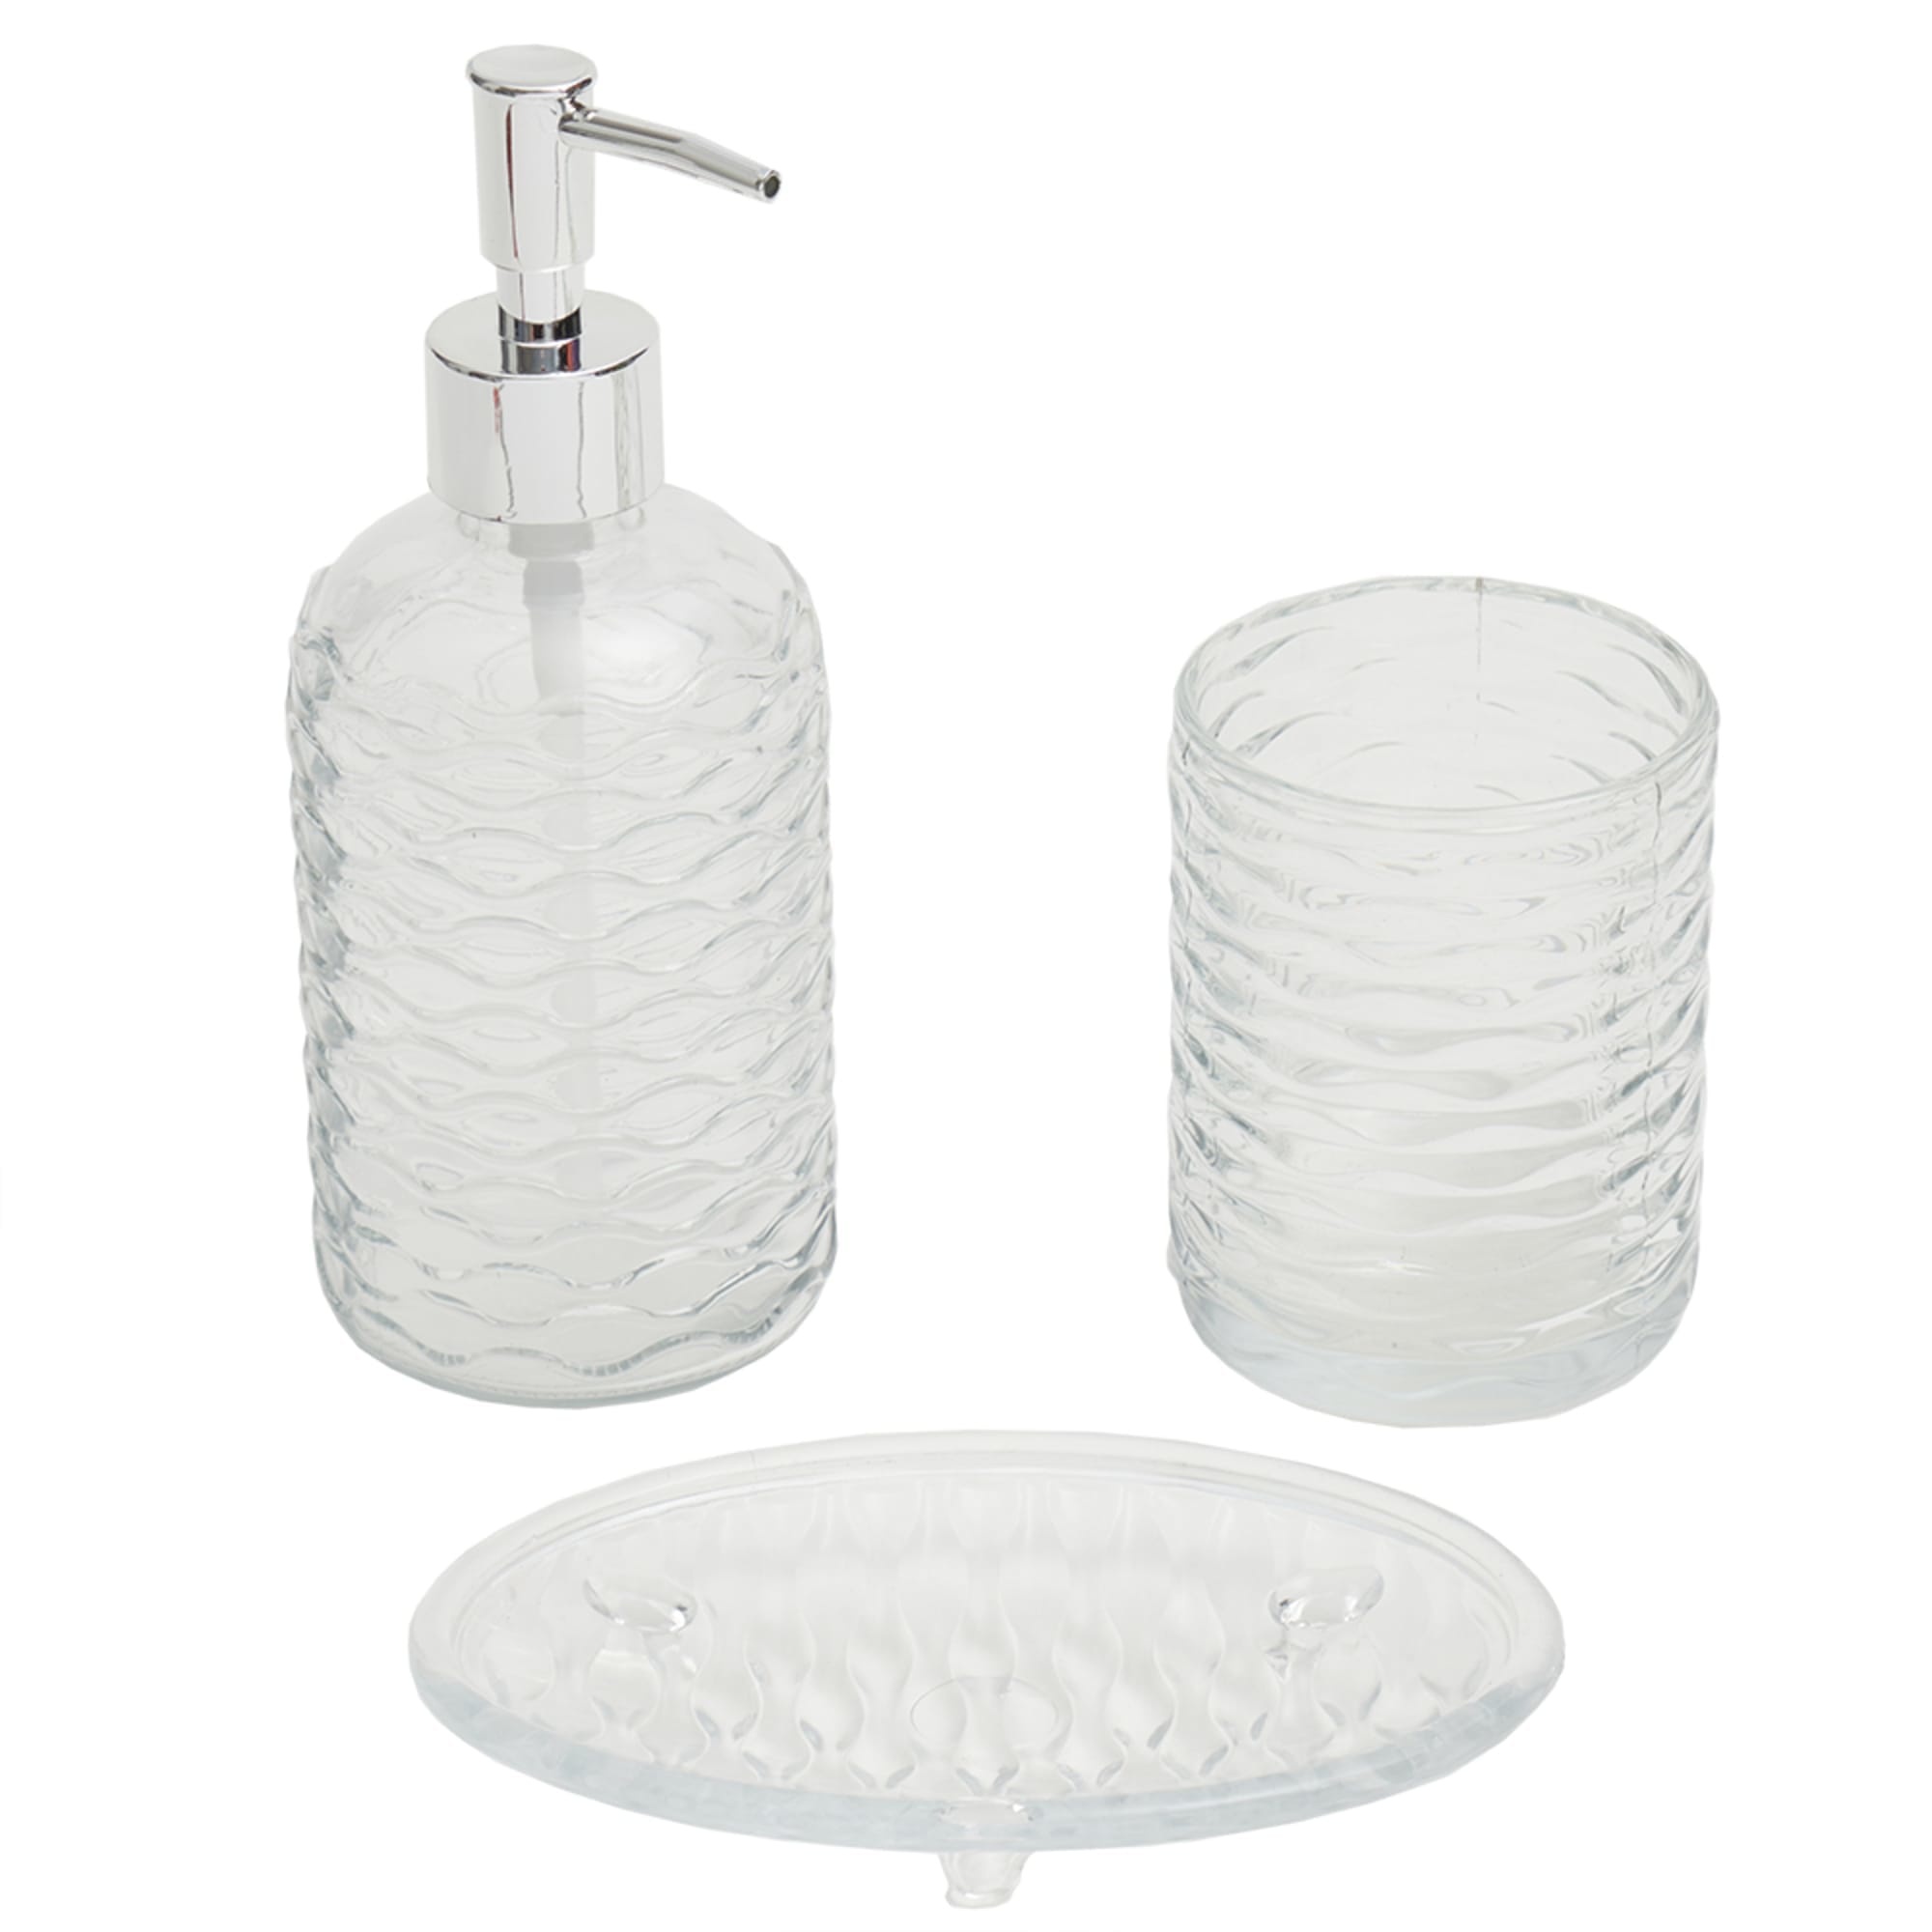 Home Basics Rippled 3 Piece Glass Bath Accessory Set, Clear $6.00 EACH, CASE PACK OF 8